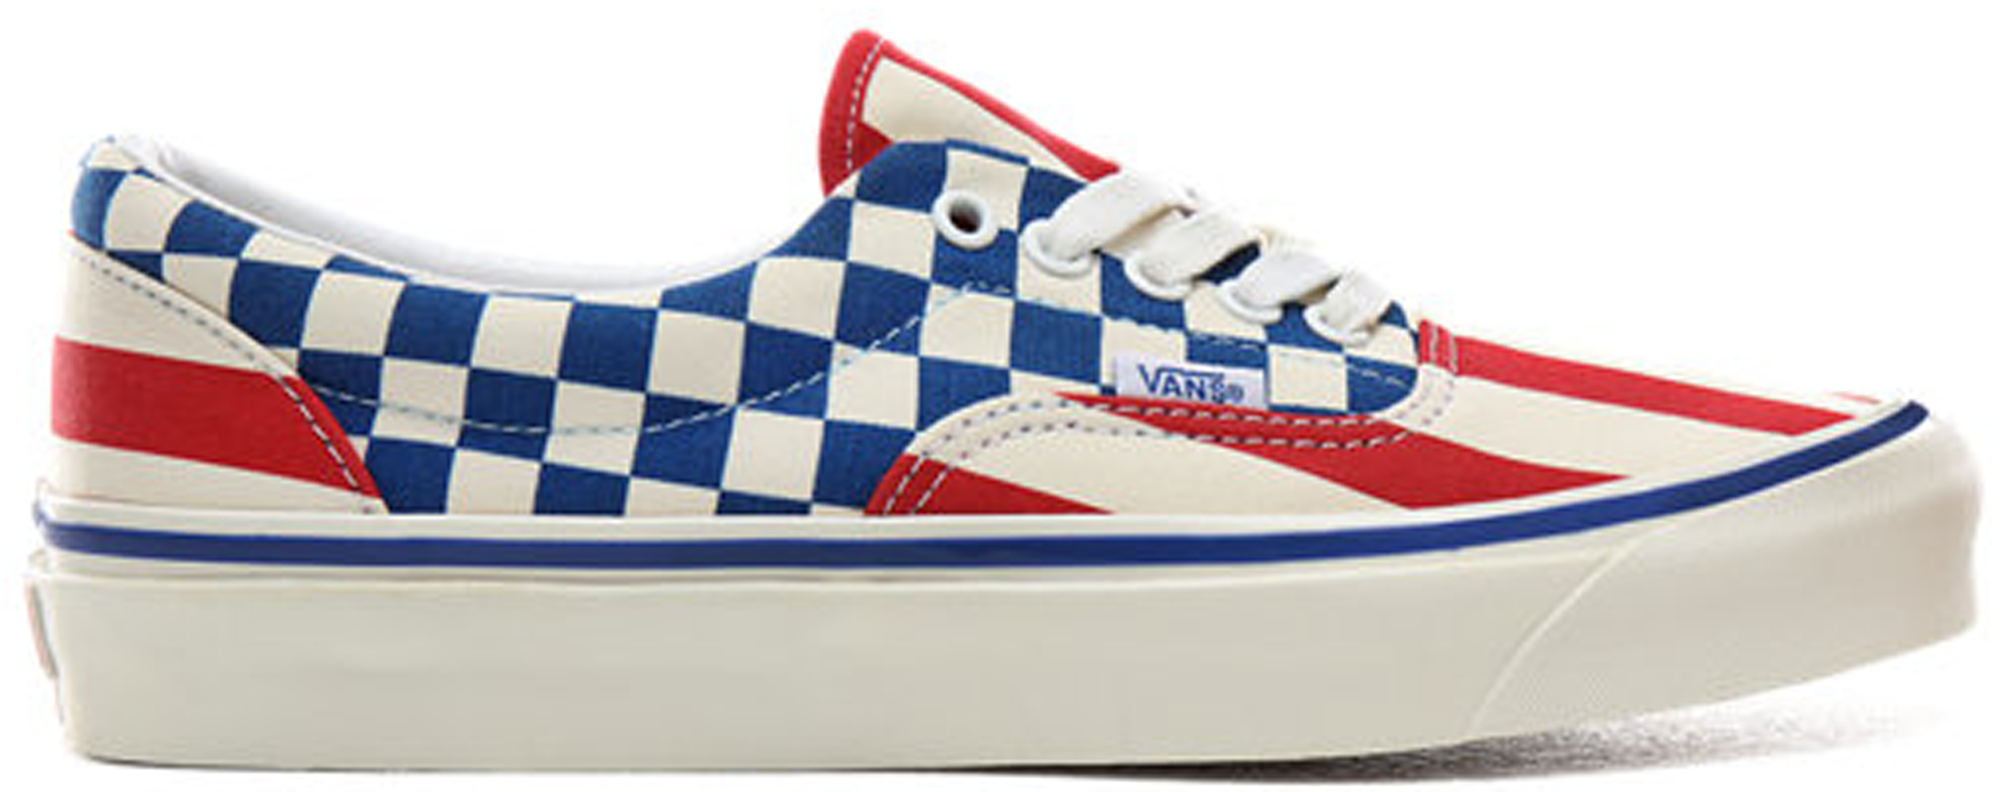 vans checkered red and blue